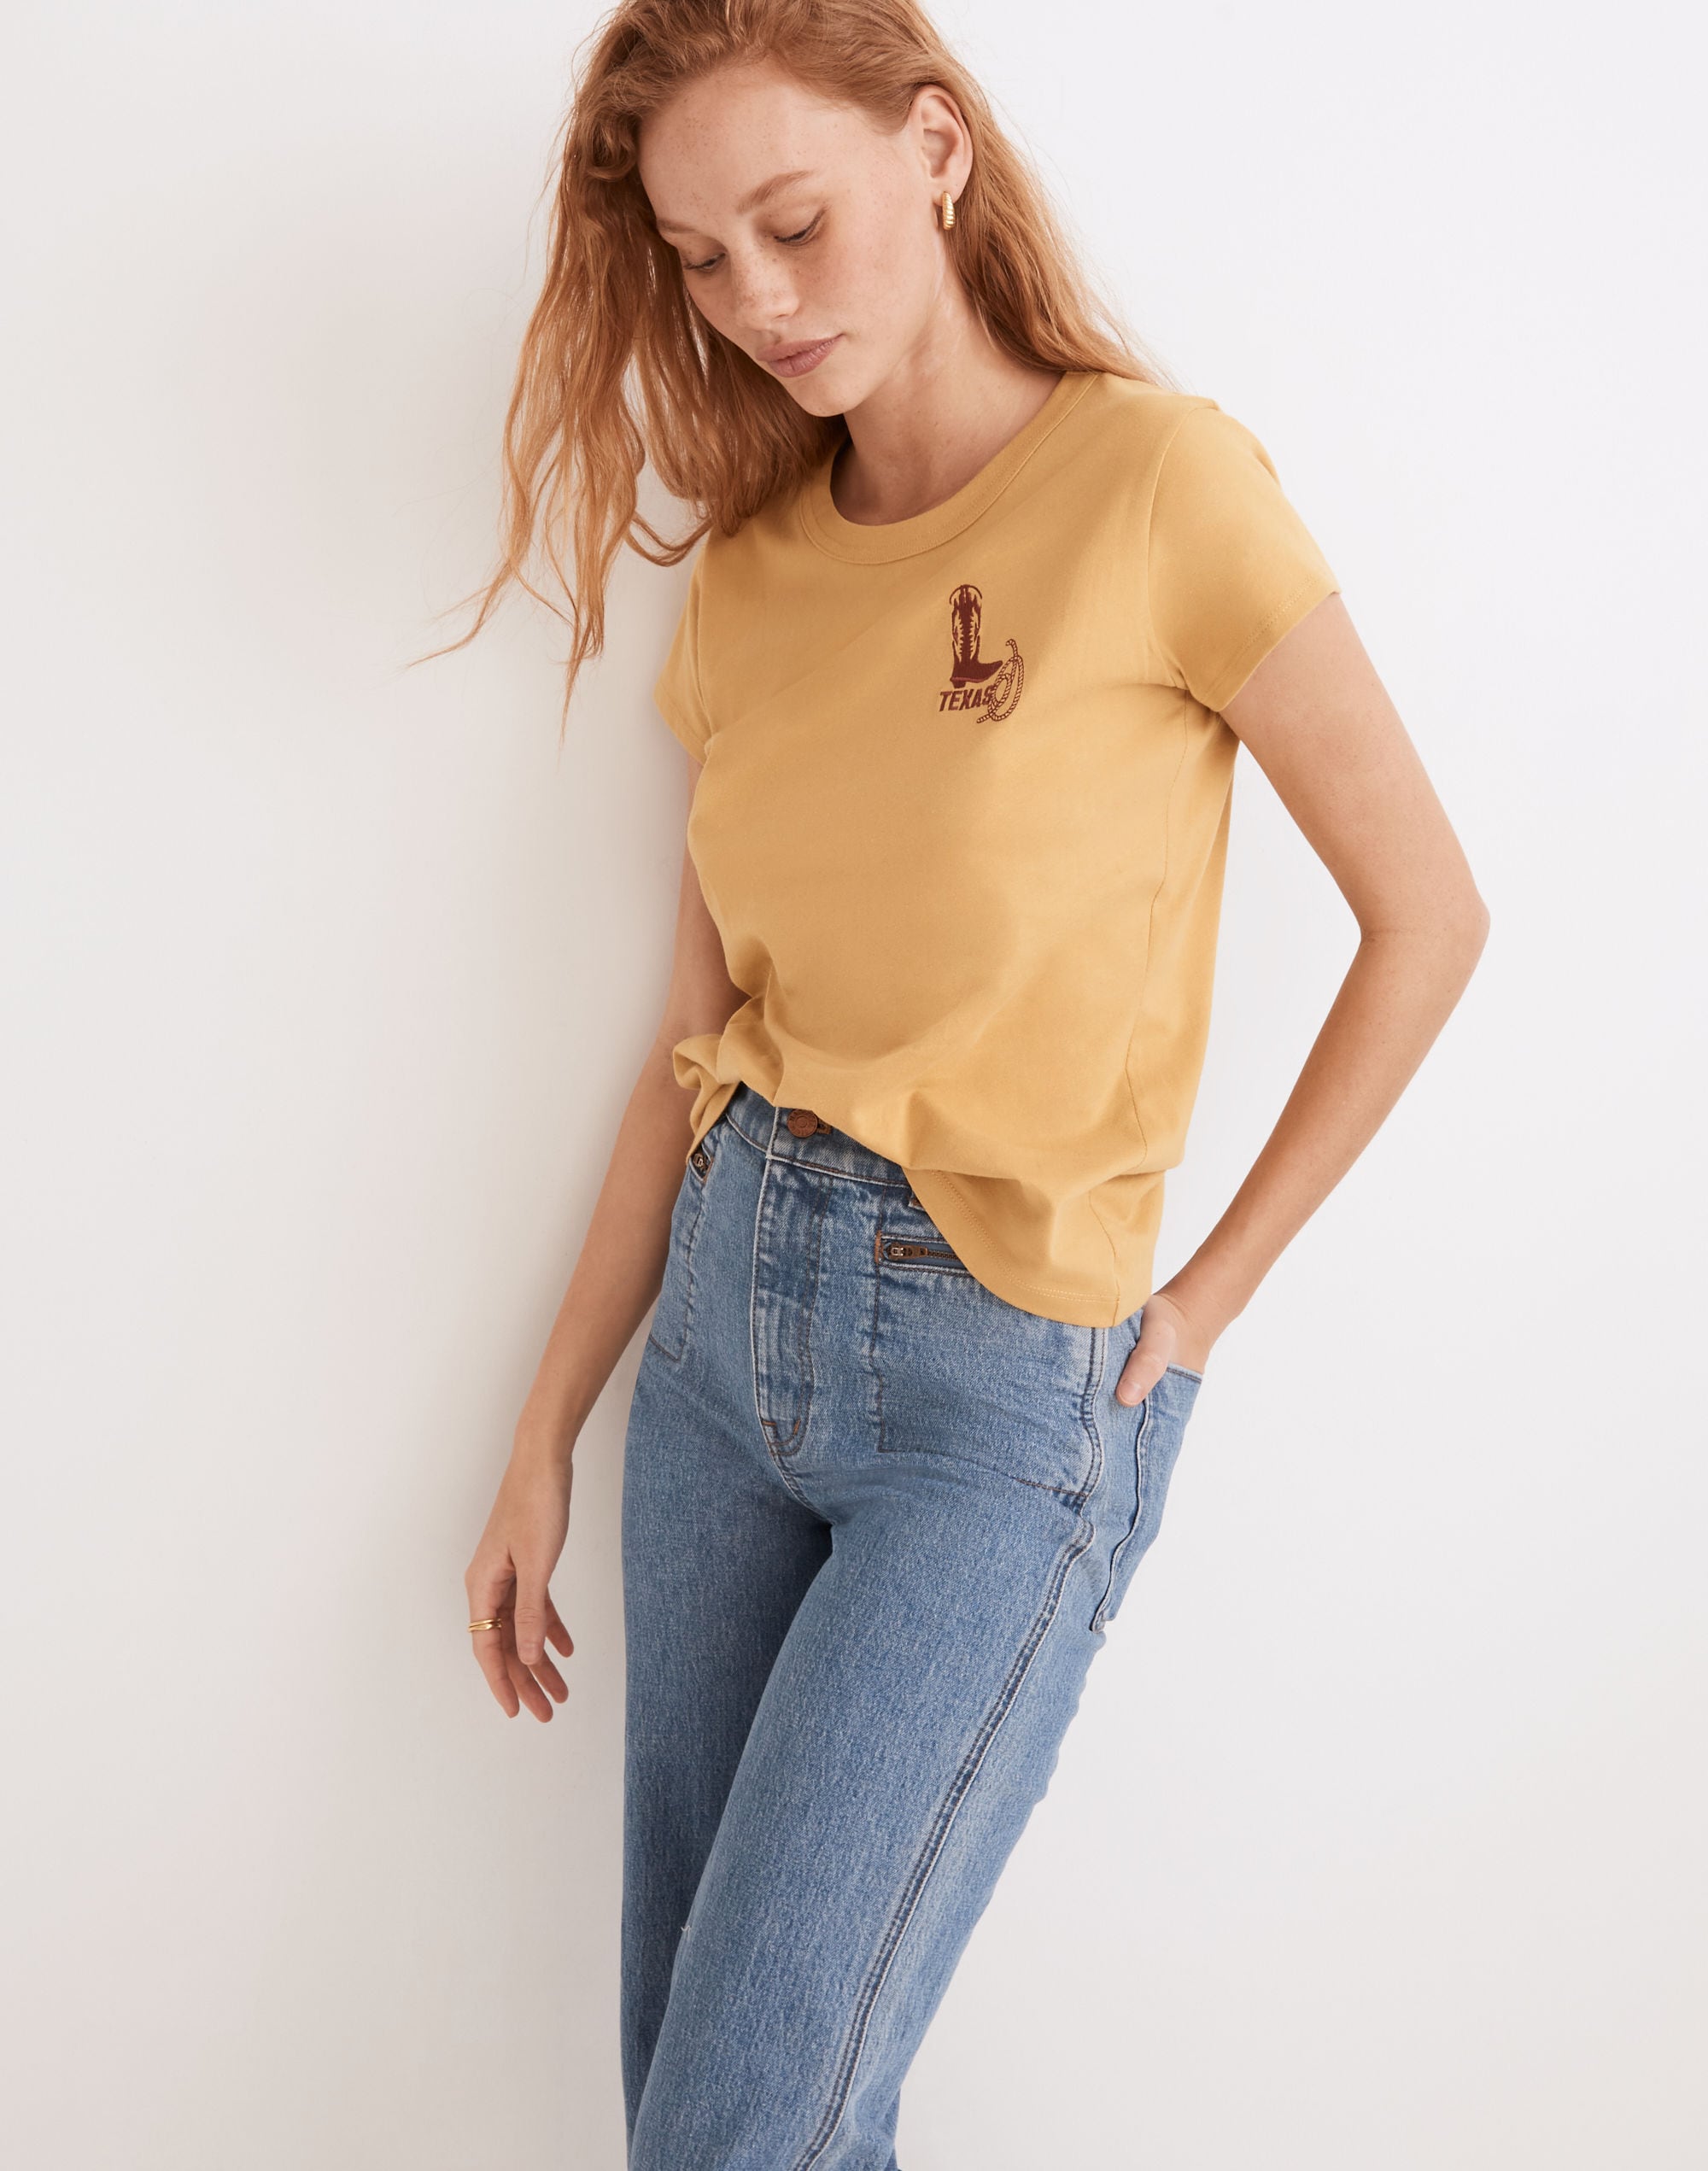 Madewell x Made Some Souvenirs Embroidered Perfect Vintage Tee